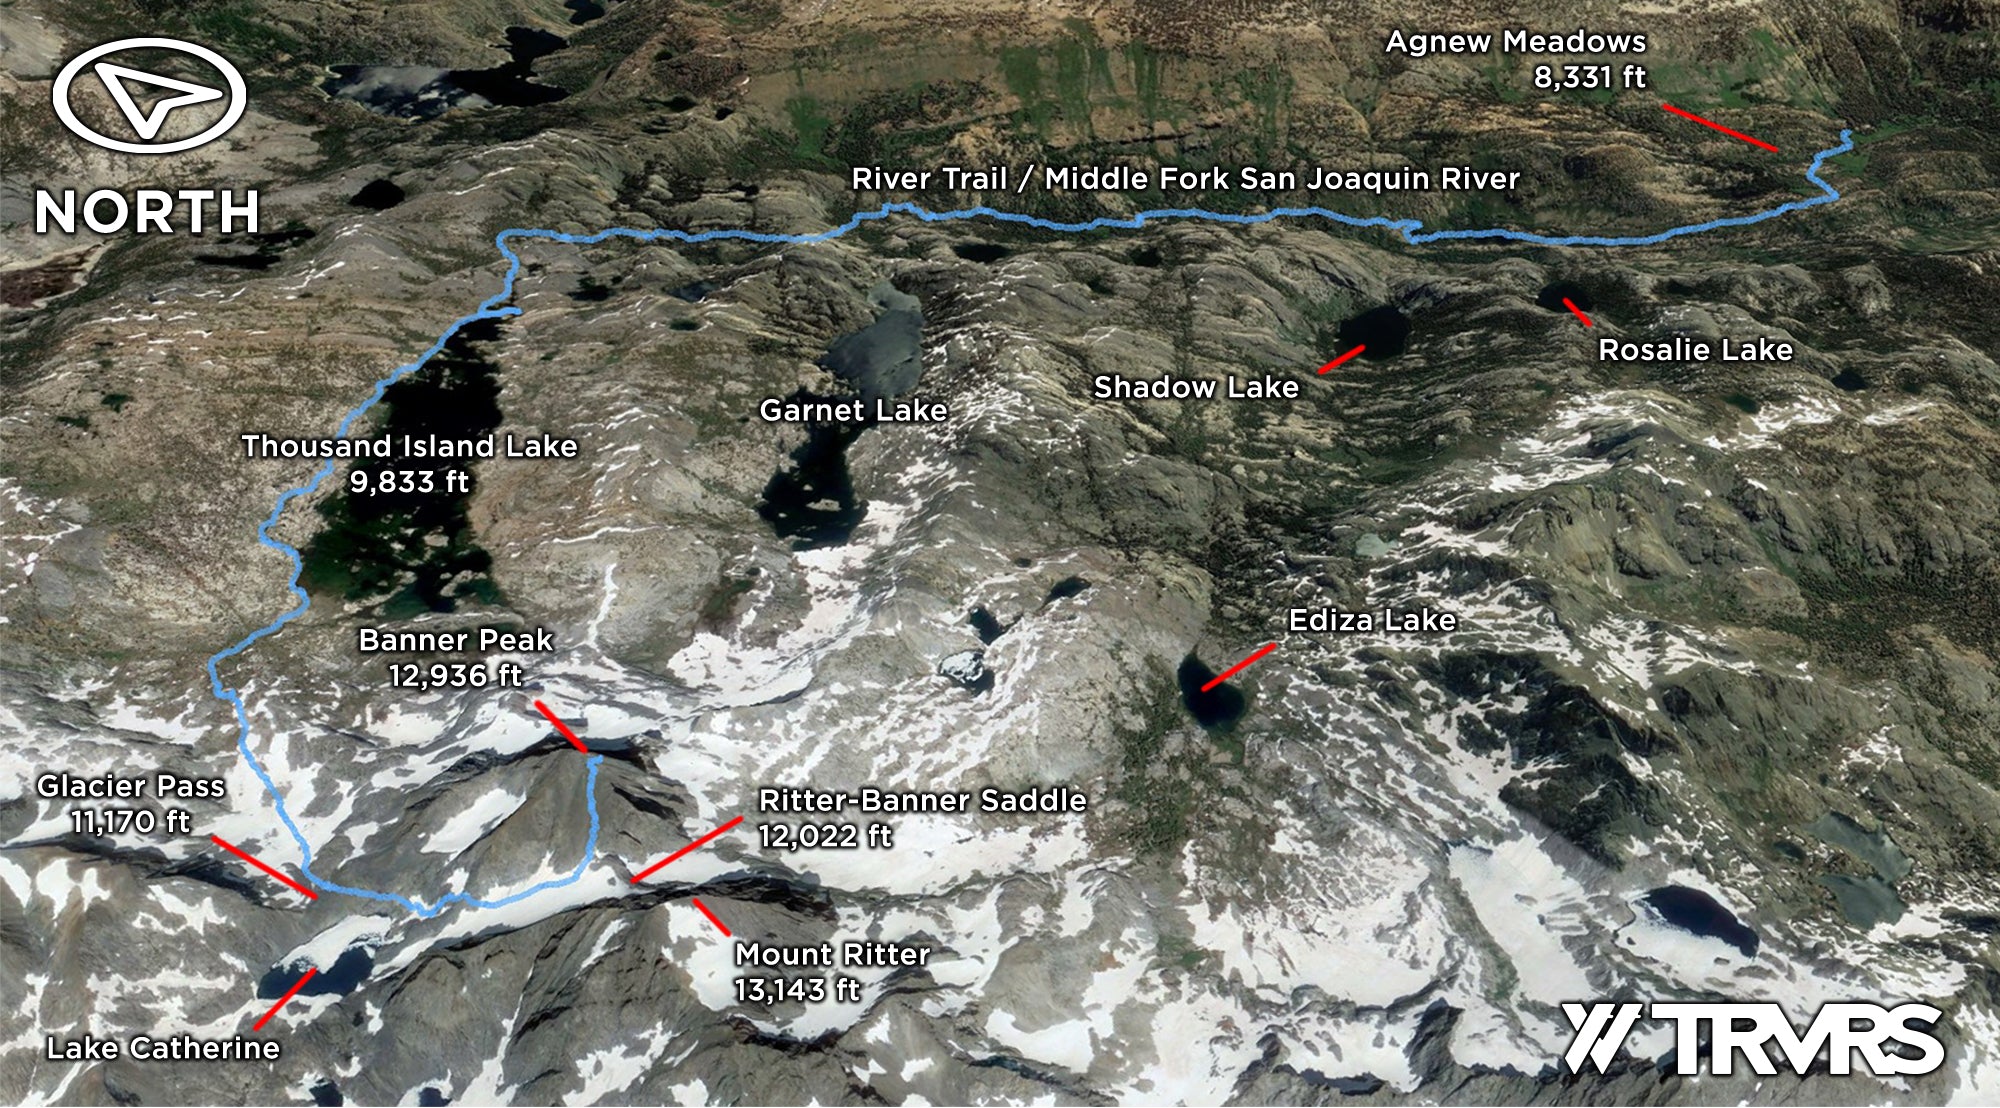 Google Earth Overview - Banner Peak via Lake Catherine, Ritter-Banner Saddle, Glacier Pass, Thousand Island Lake, Pacific Crest Trail, Middle Fork San Joaquin River, River Trail, Agnew Meadows, Ansel Adams Wilderness, Mammoth Lakes, Sierra Nevada Mountains | TRVRS Apparel